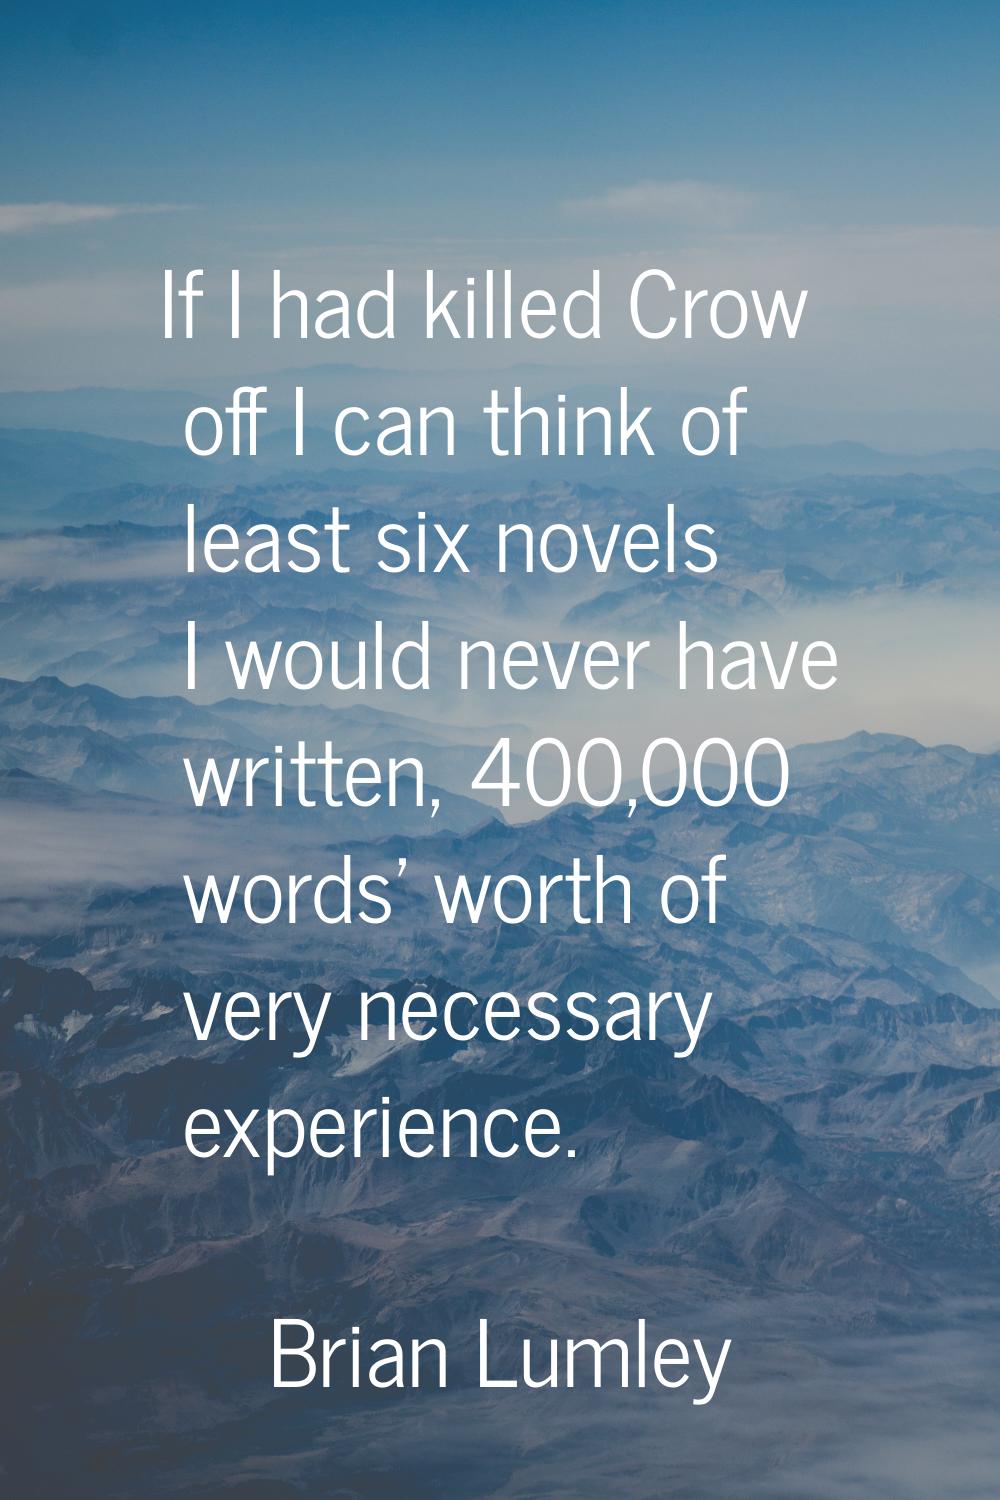 If I had killed Crow off I can think of least six novels I would never have written, 400,000 words'